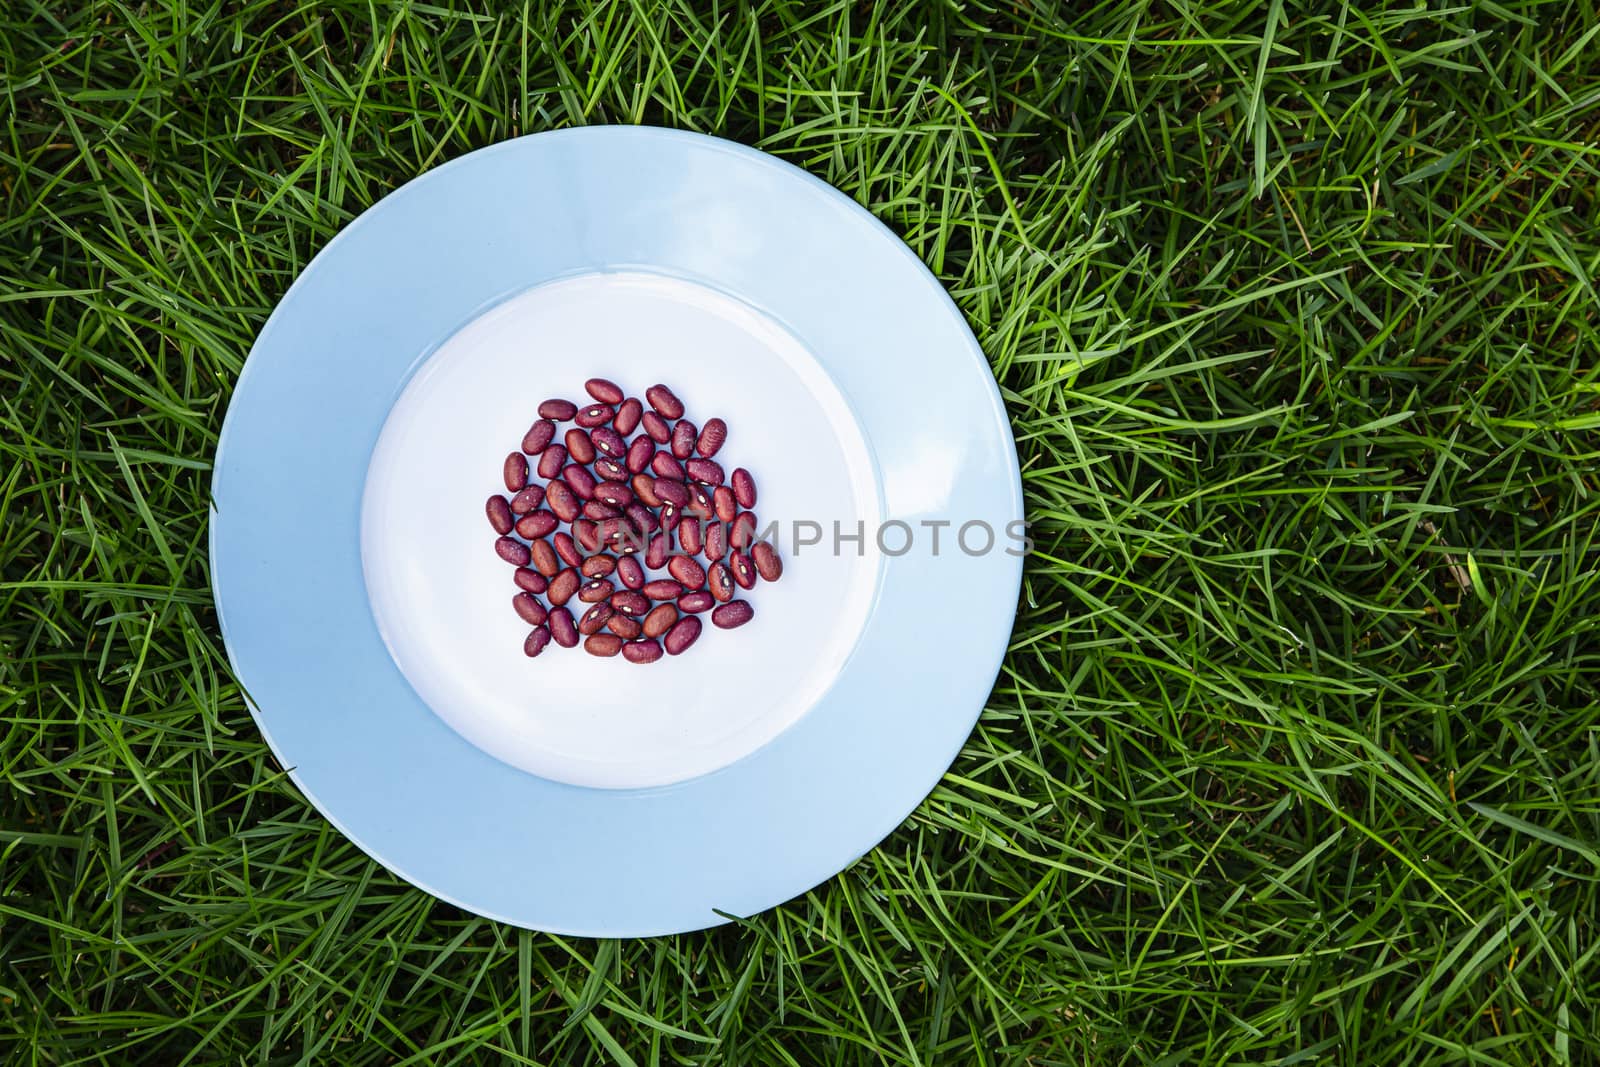 Dry red bean on a blue rimmed plate on top of green grass